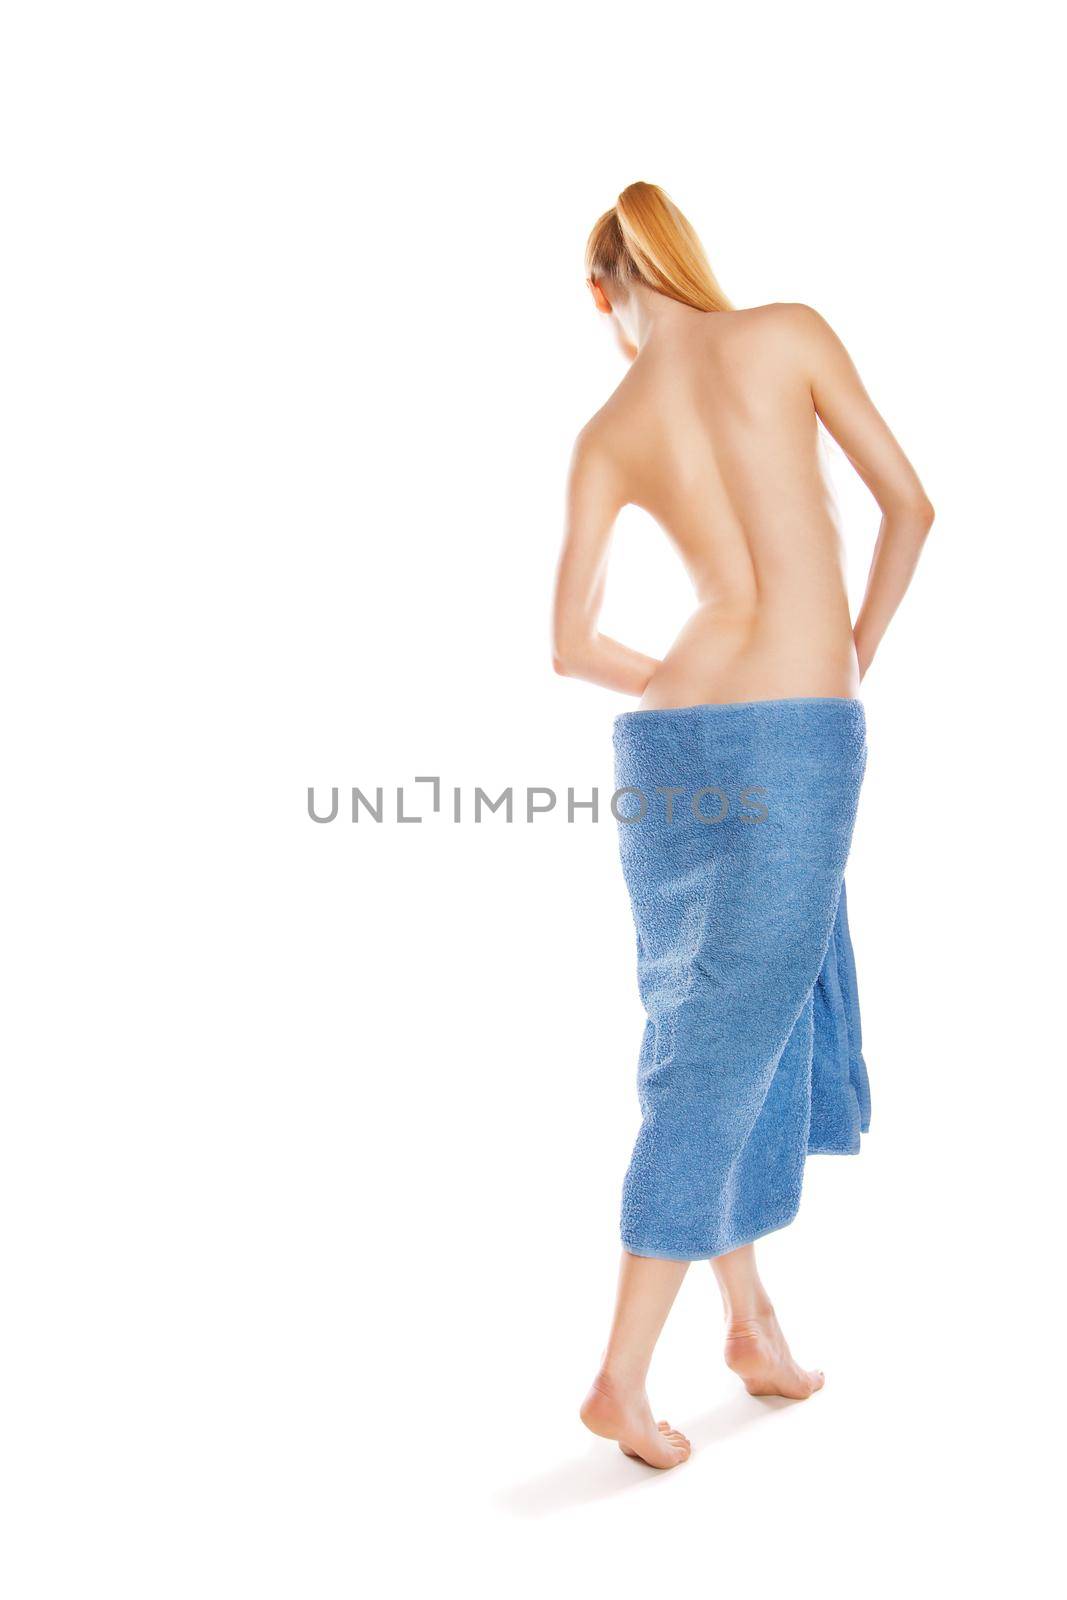 slim young woman after bath with blue towel over white